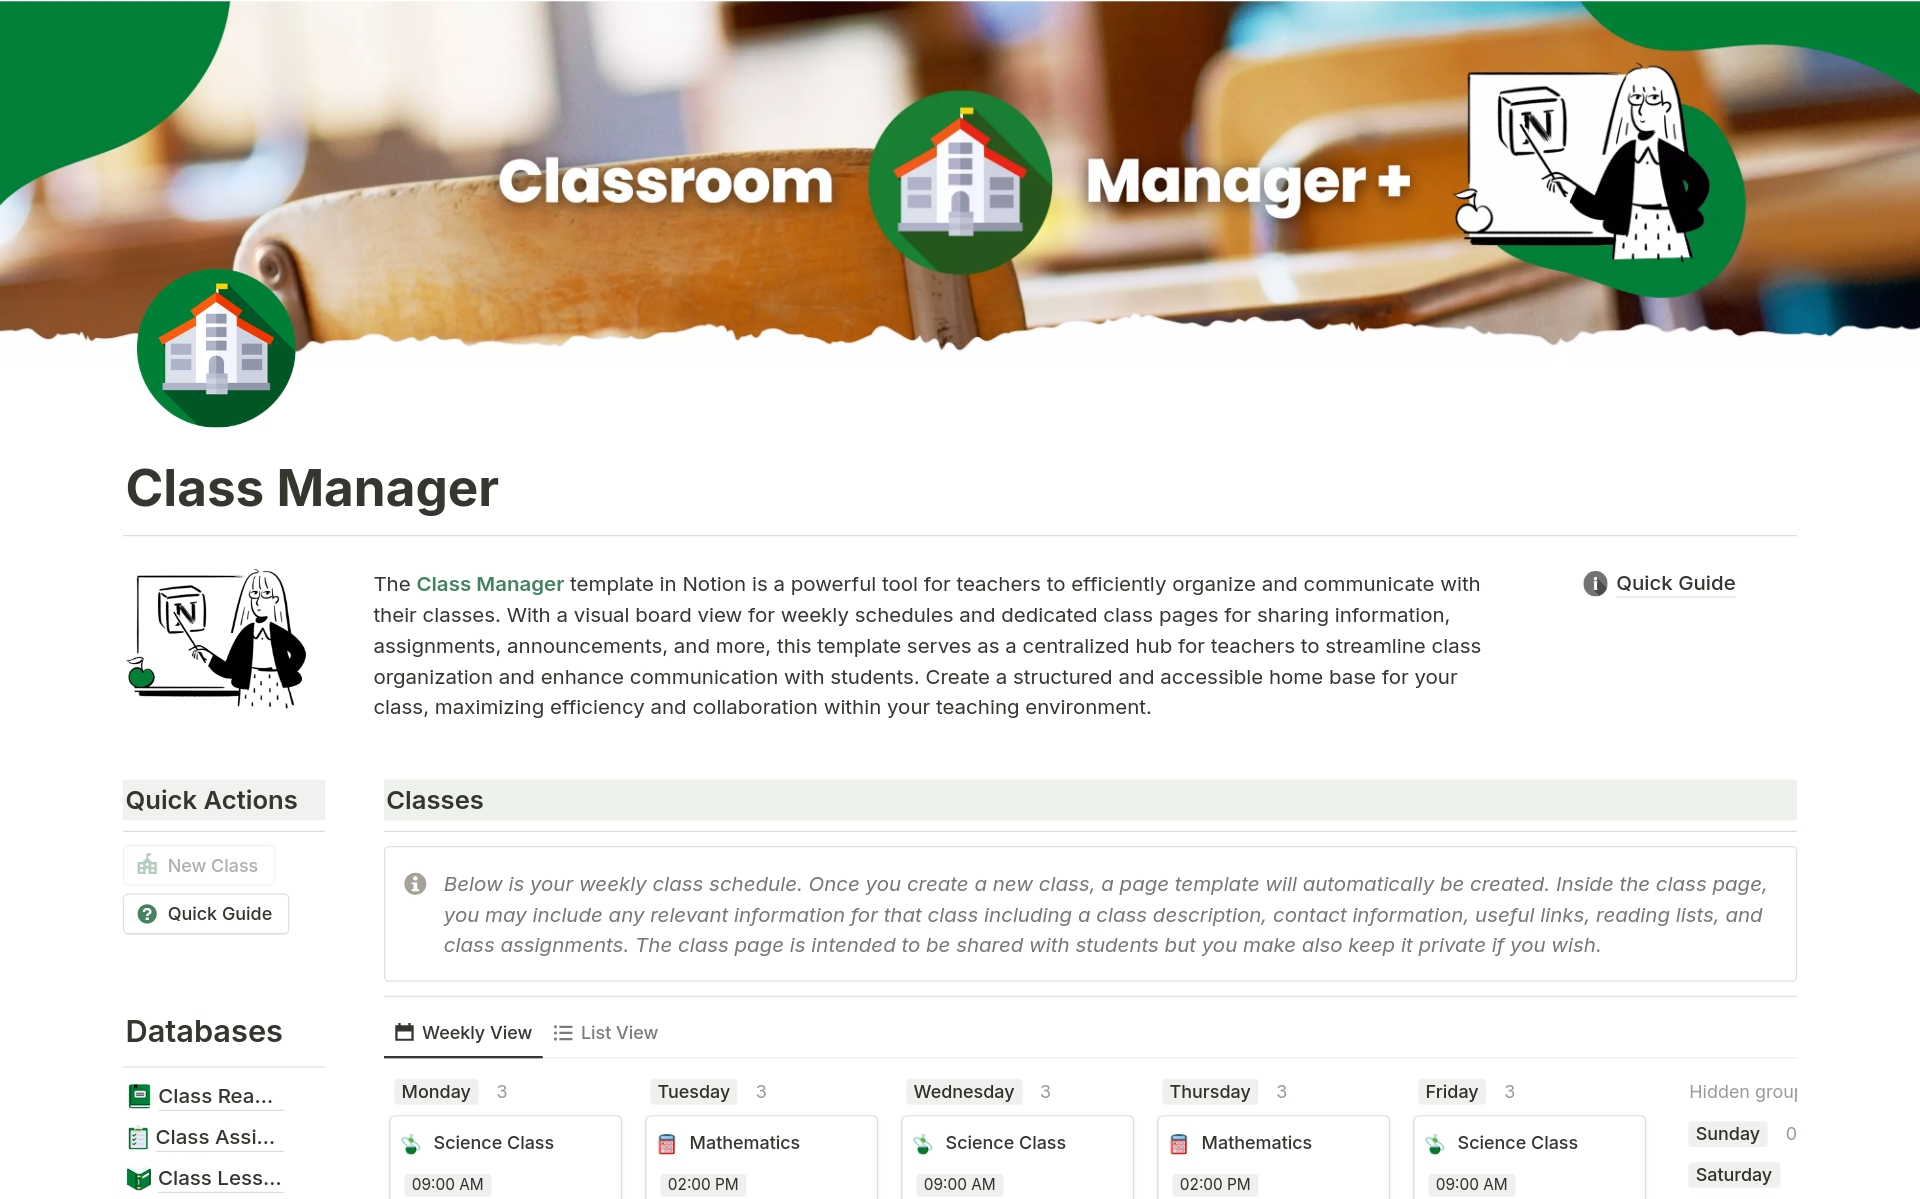 Simplifies classroom organization and communication, providing teachers with a centralized platform to create schedules, share information, assignments, and announcements with their students.